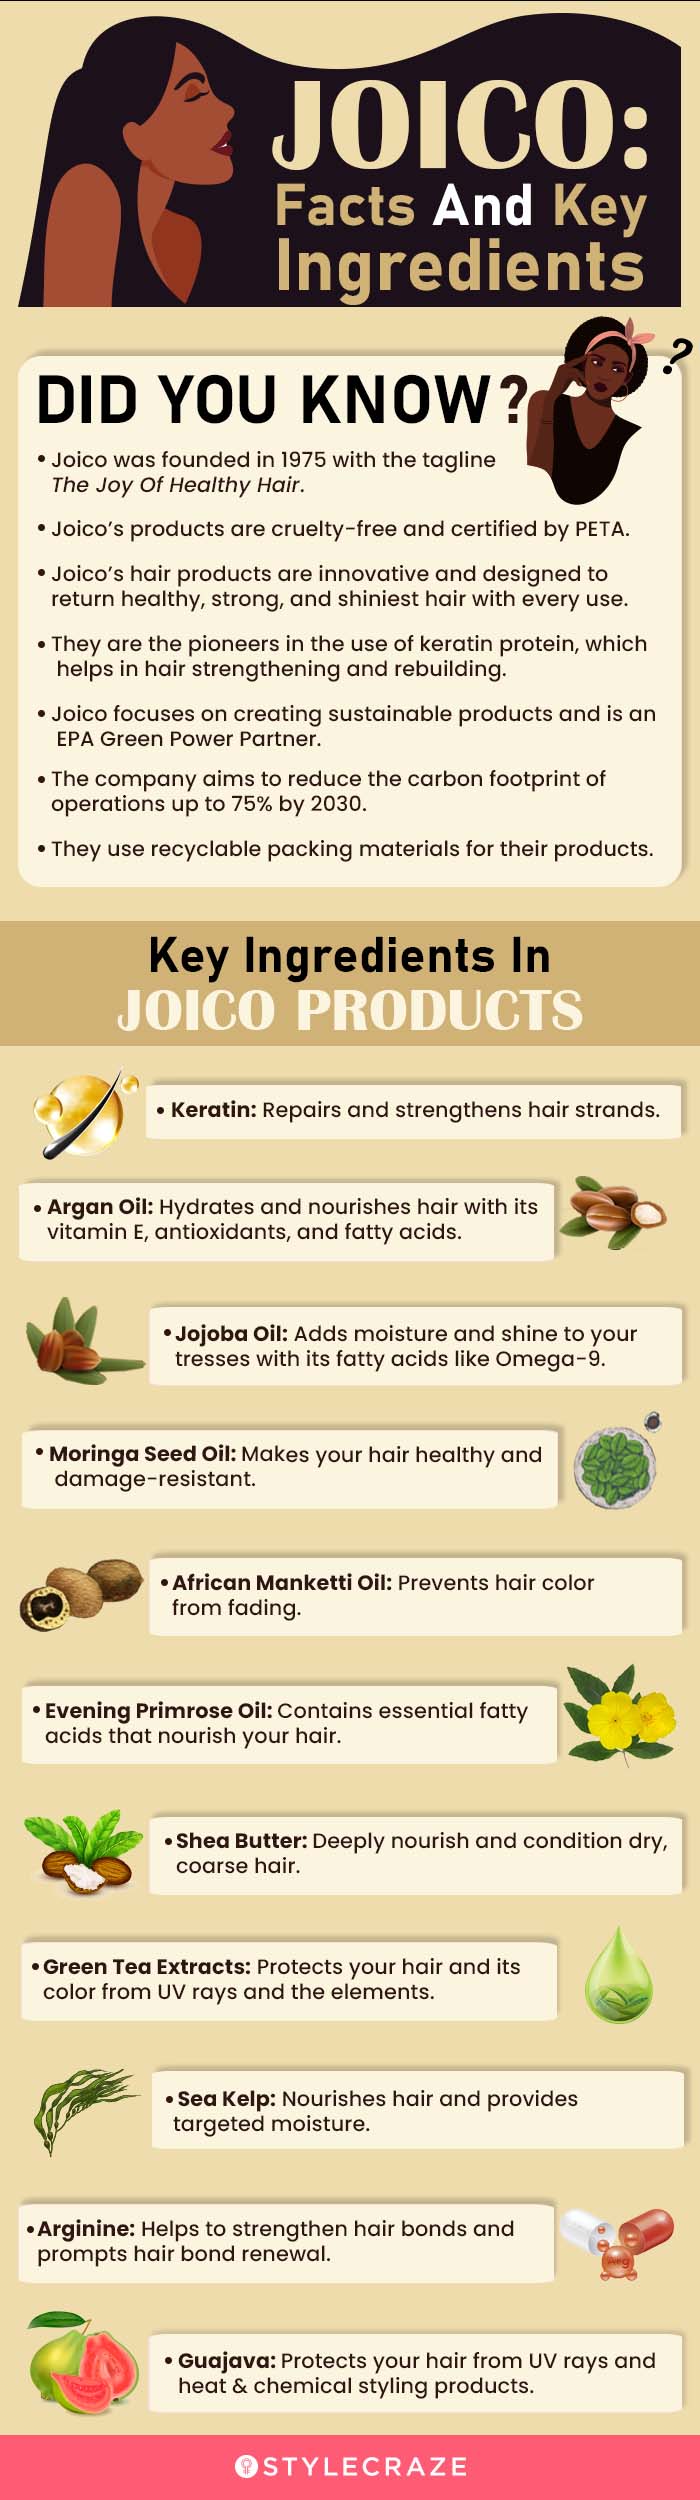 Joico: Facts And Key Ingredients